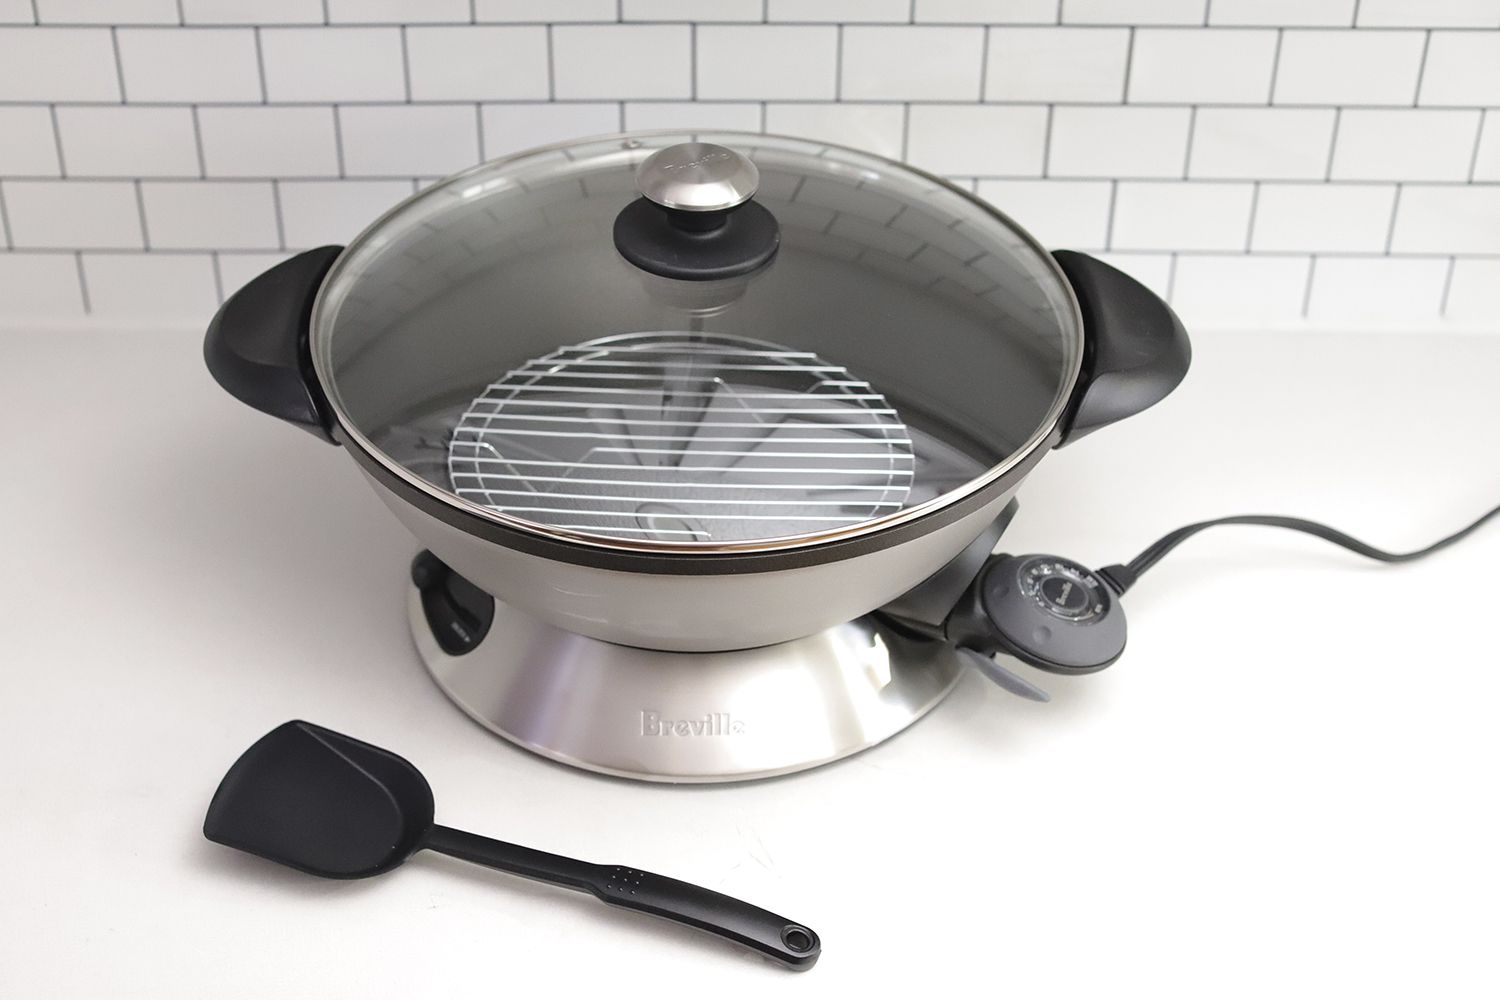 Breville Hot Wok Pro with accessories in a kitchen.